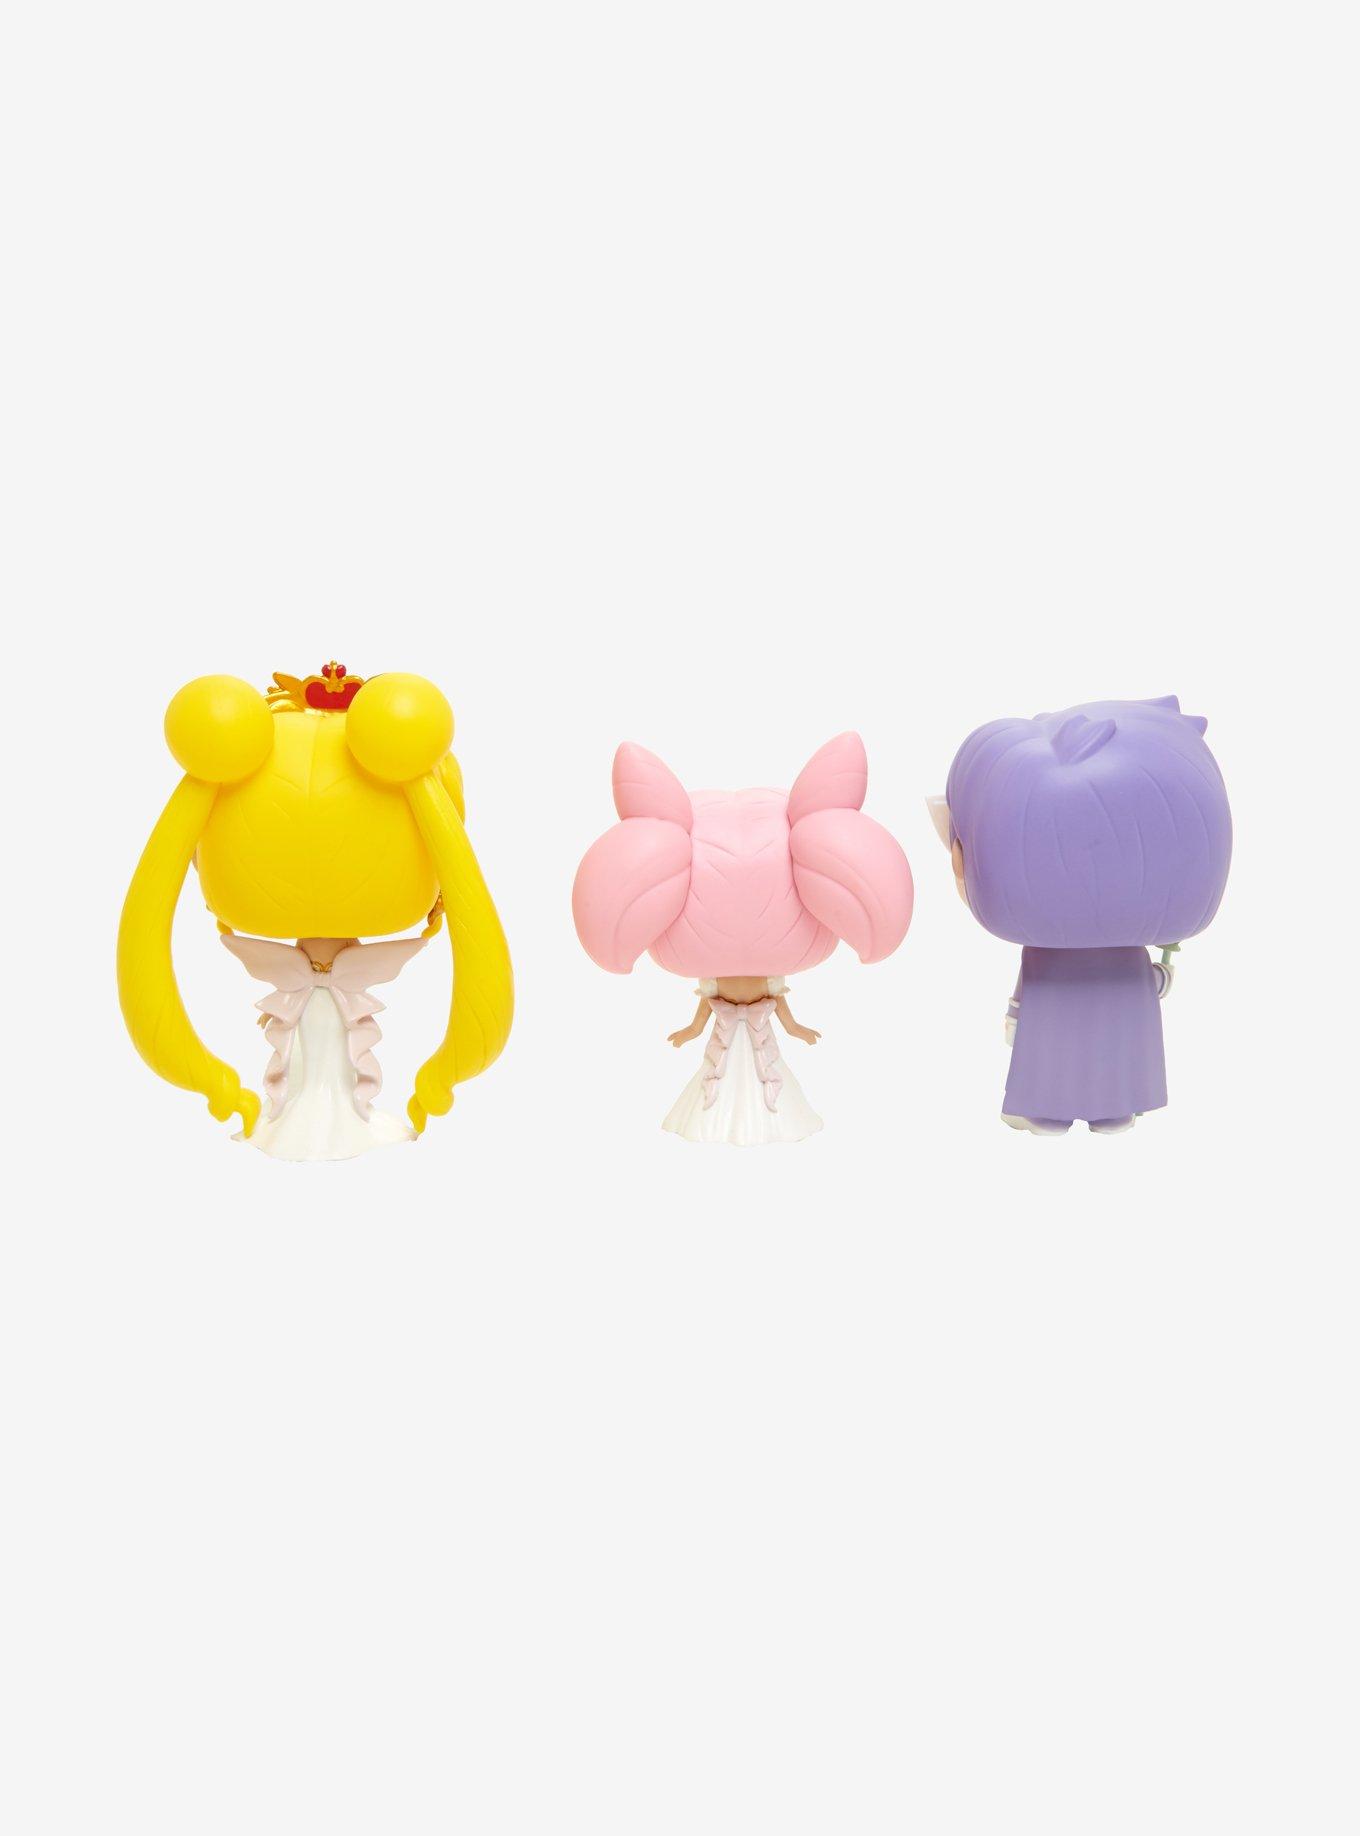 Funko Sailor Moon Pop! Animation Neo Queen Serenity, Small Lady & King Endymion Vinyl Figure Set Hot Topic Exclusive, , alternate